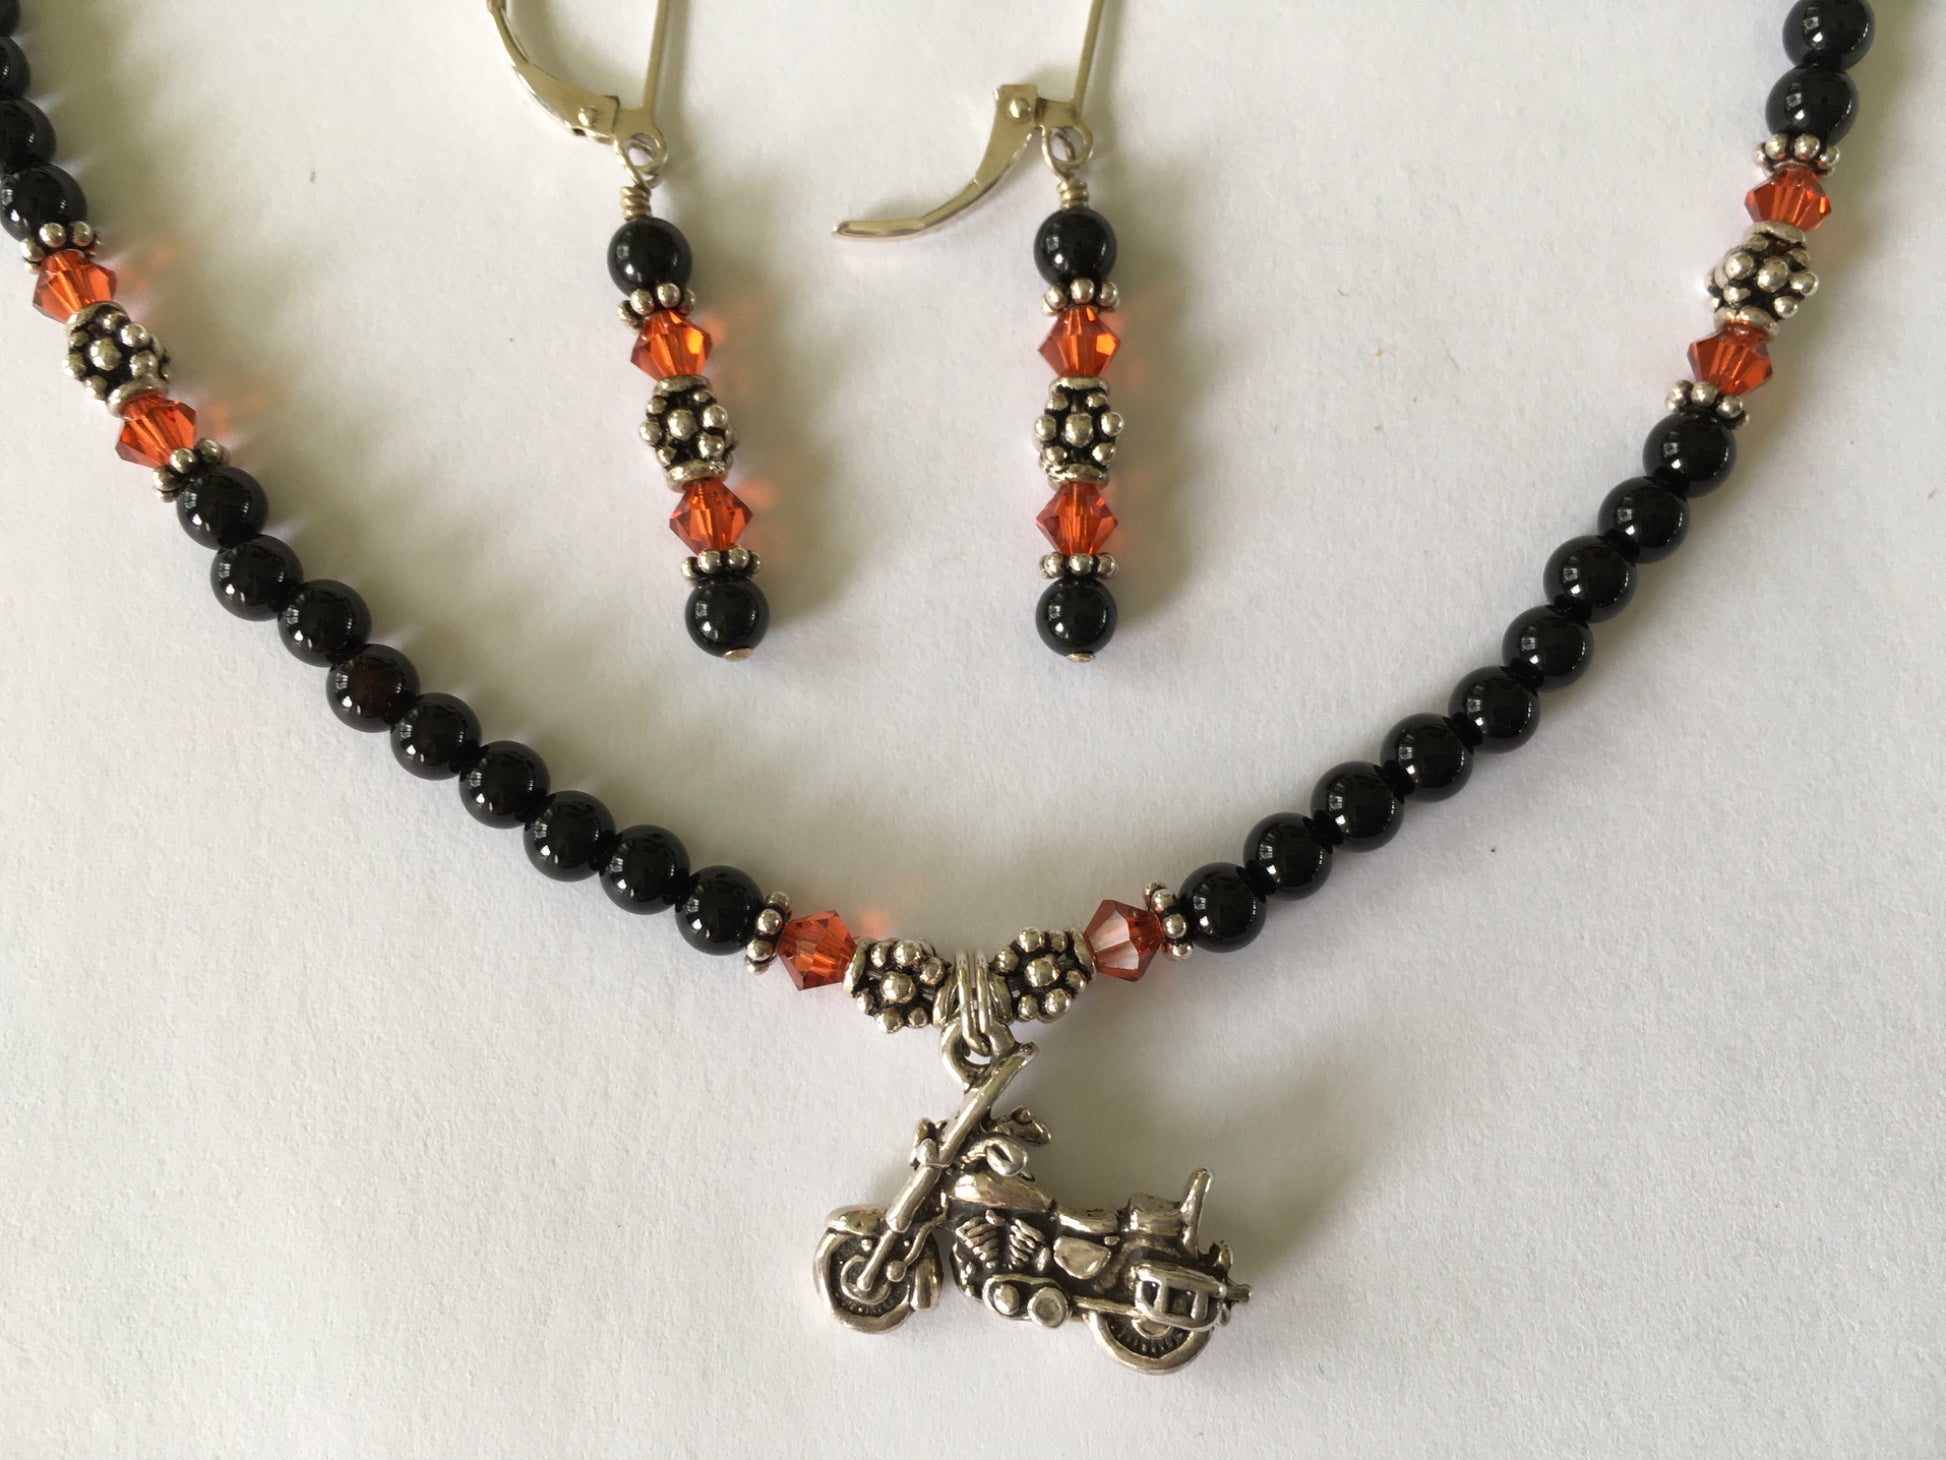 Black Onyx, Orange Swarovski Crystals and Sterling Silver Necklace and Earring Set - 2